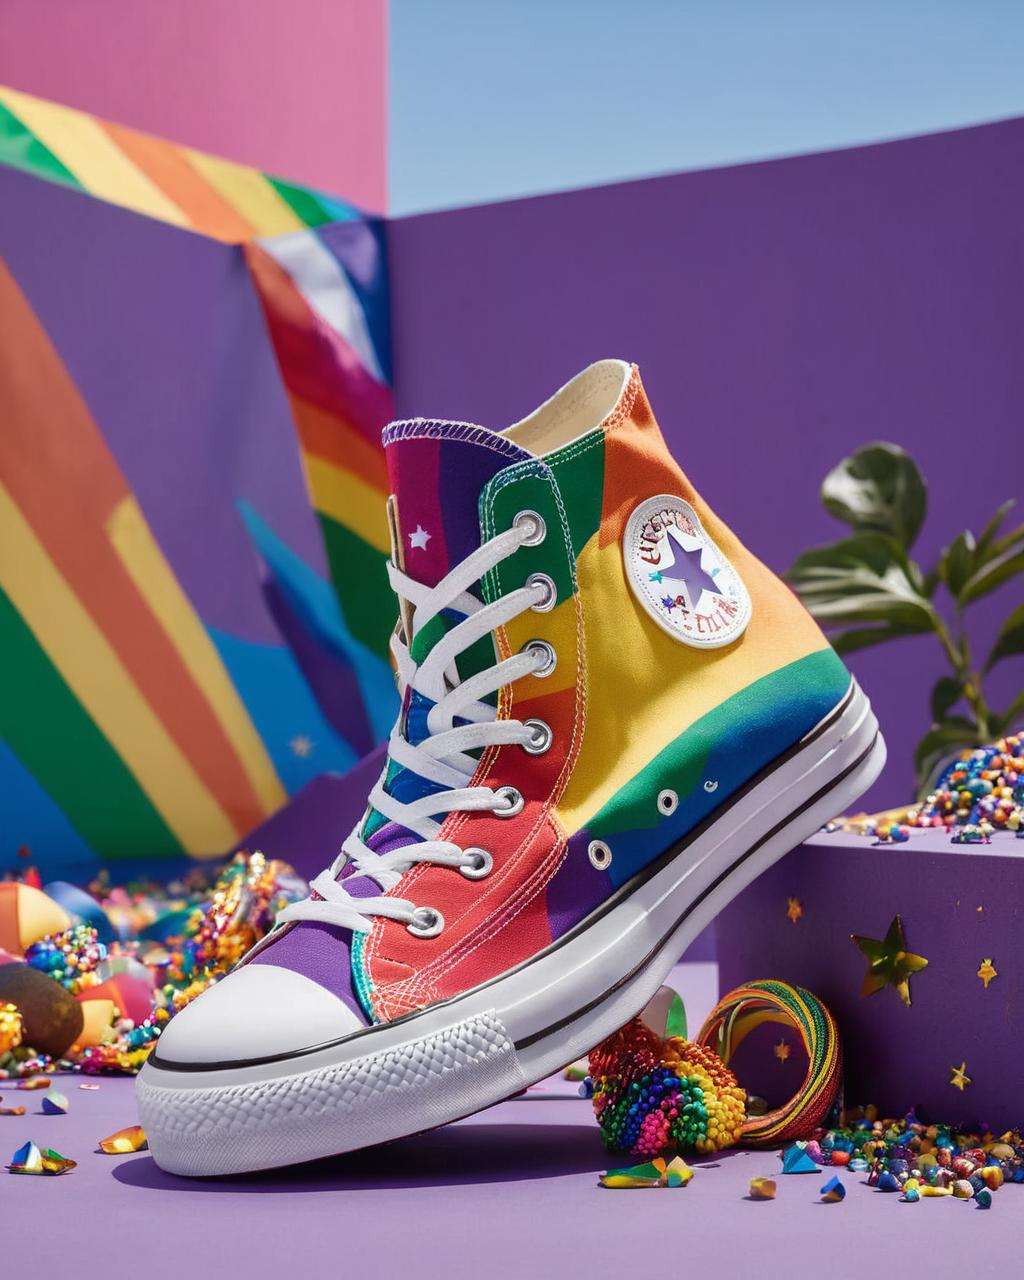 Converse Chuck Taylor pride collection, inclusive statement:0.6, photographed with vibrant colors and pride-themed accessories, highlighting their role in celebrating diversity and promoting equality, lifestyle shot:0.8.<lora:shoes:1.0>